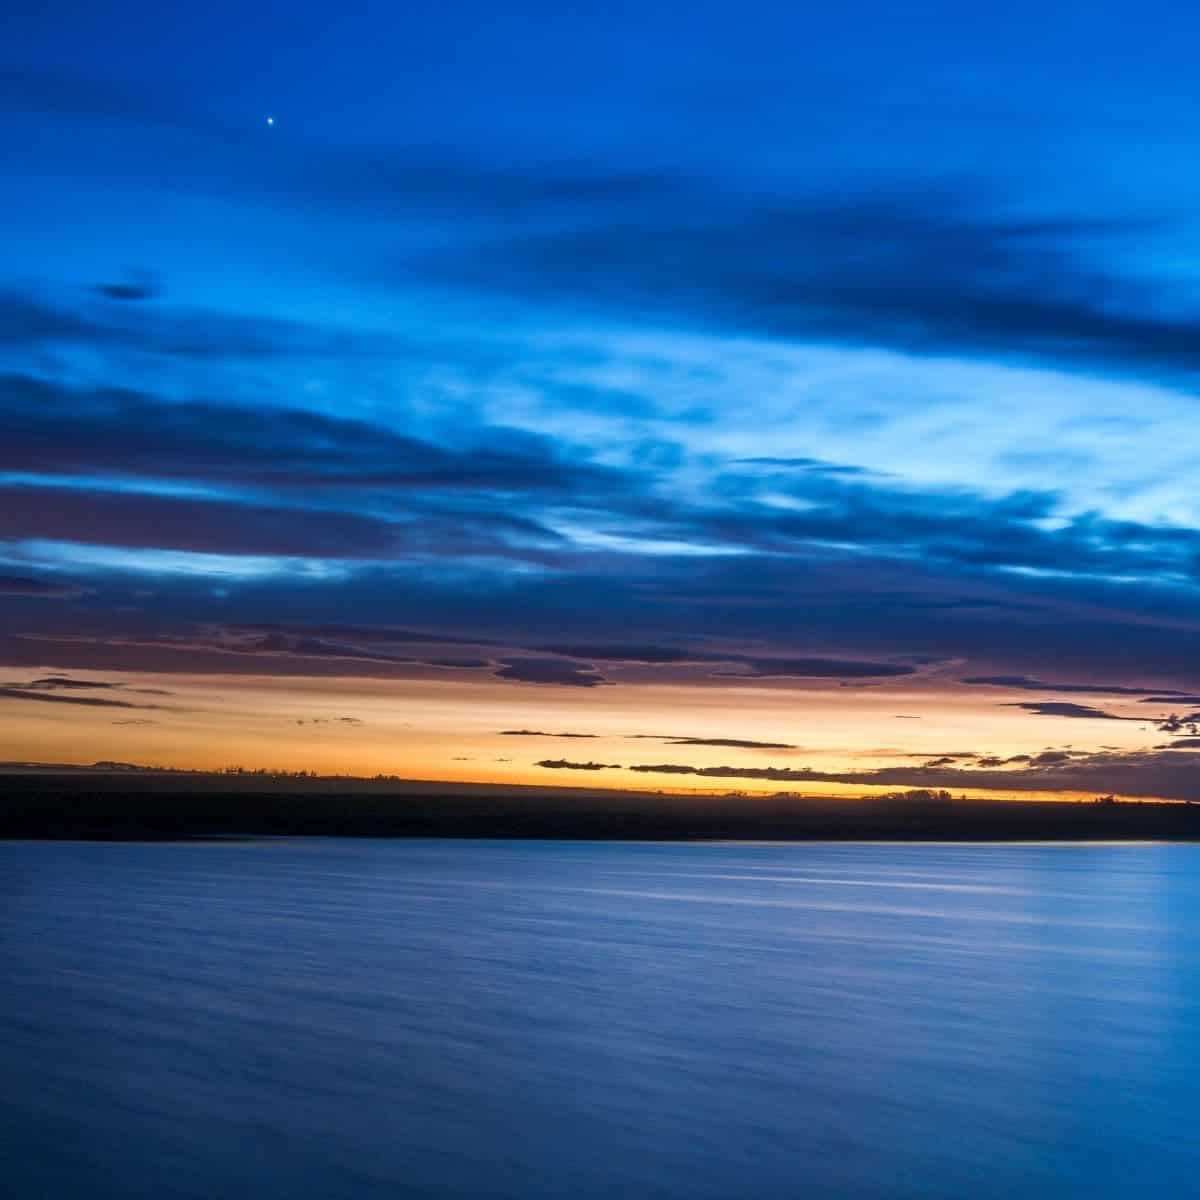 Water and sky during blue hour.